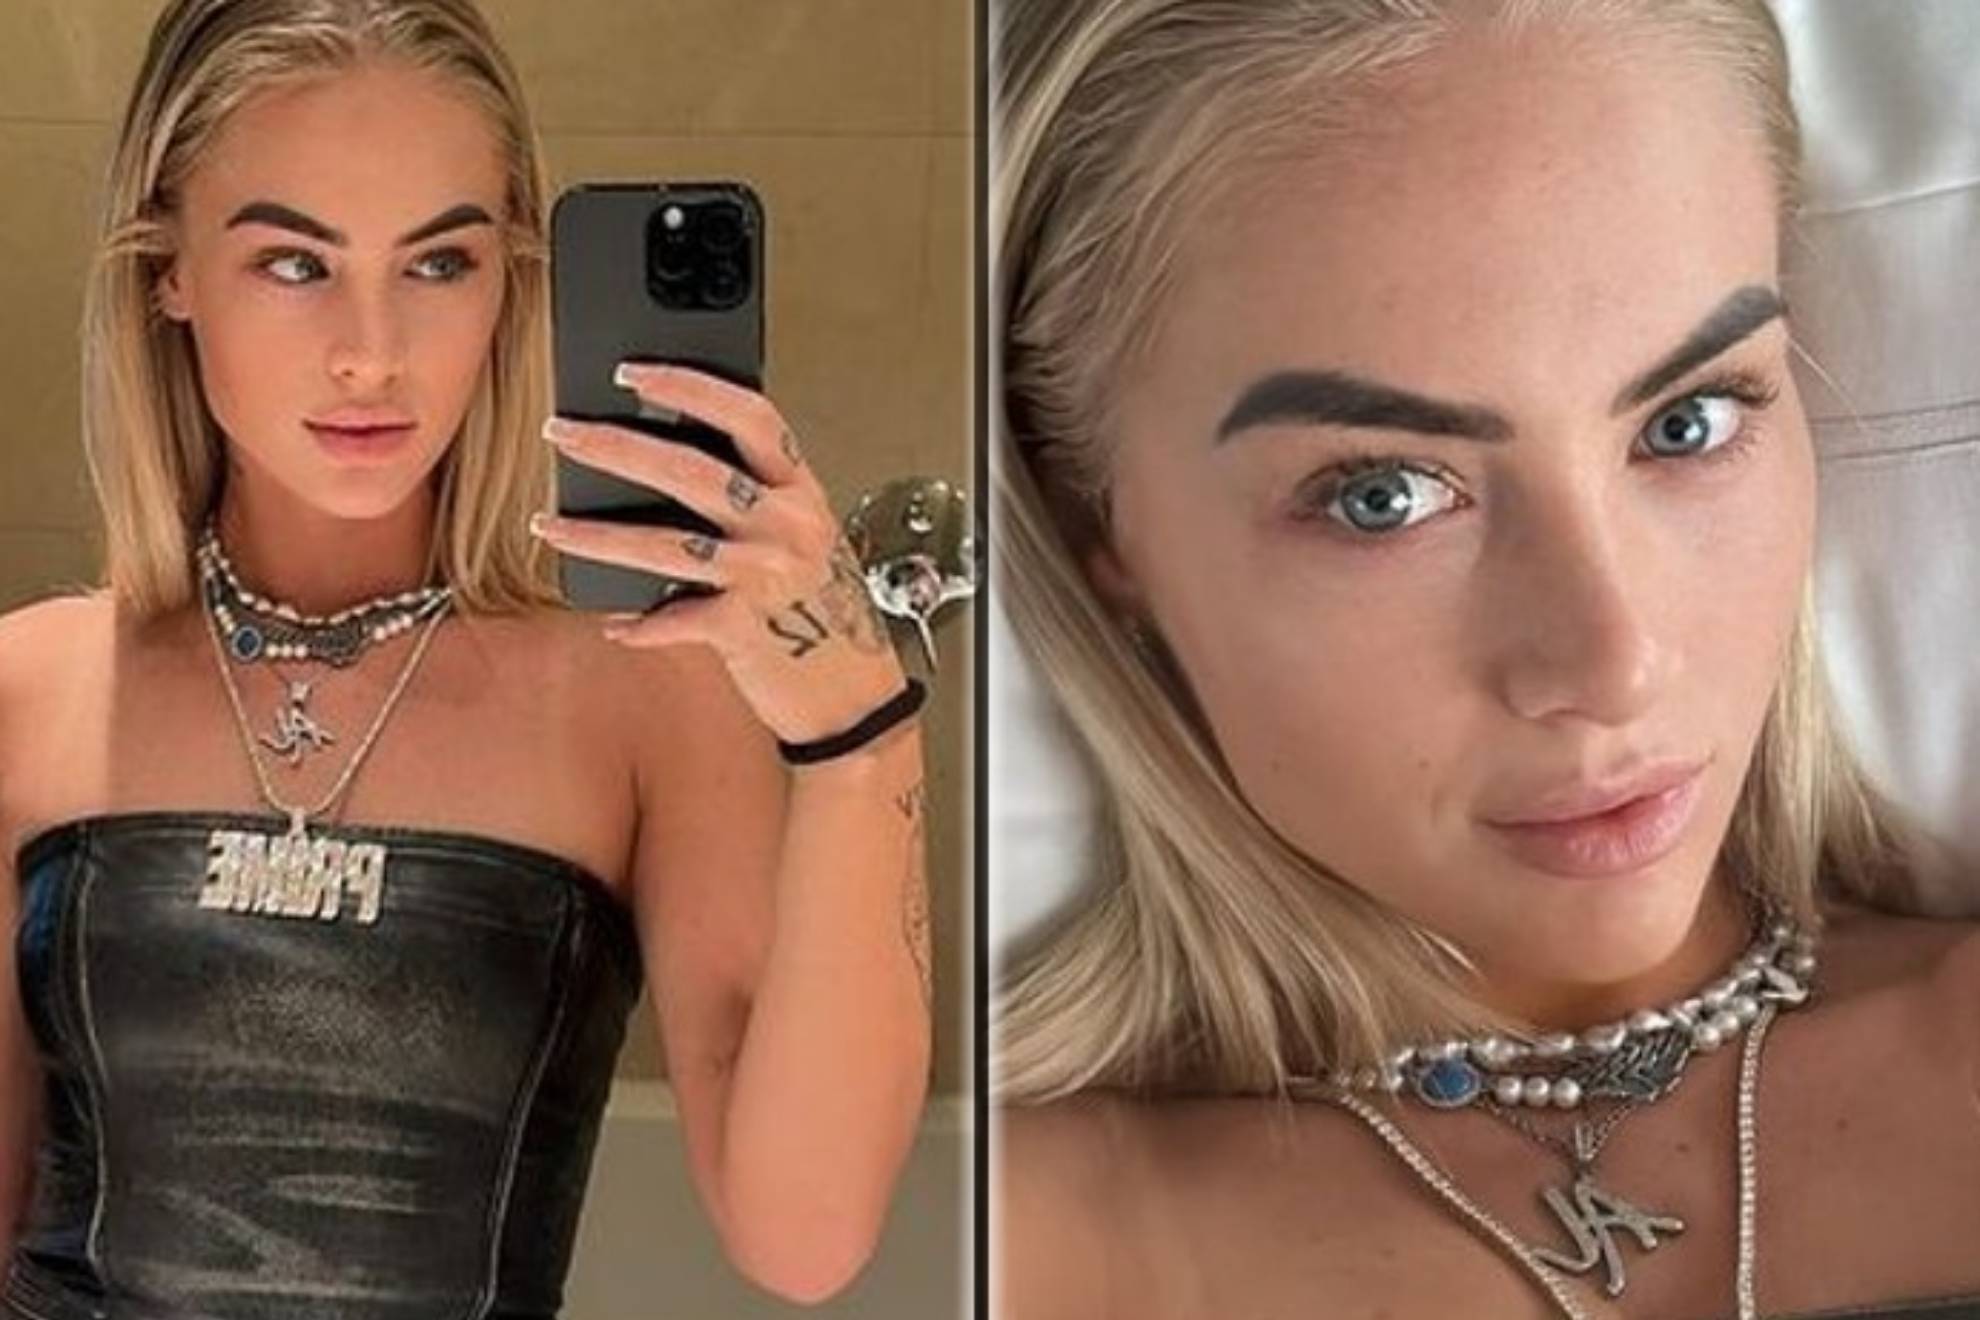 Aston Villa player Alisha Lehmann has surprised her 15.4 million followers on Instagram with her most natural, makeup-free photo in front of the mirror. The Swiss star, who wore a 'Prime' necklace, dated footballer Ramona Bachmann (Paris Saint-Germain) and a few months ago broke up with fellow footballer Douglas Luiz (Aston Villa).